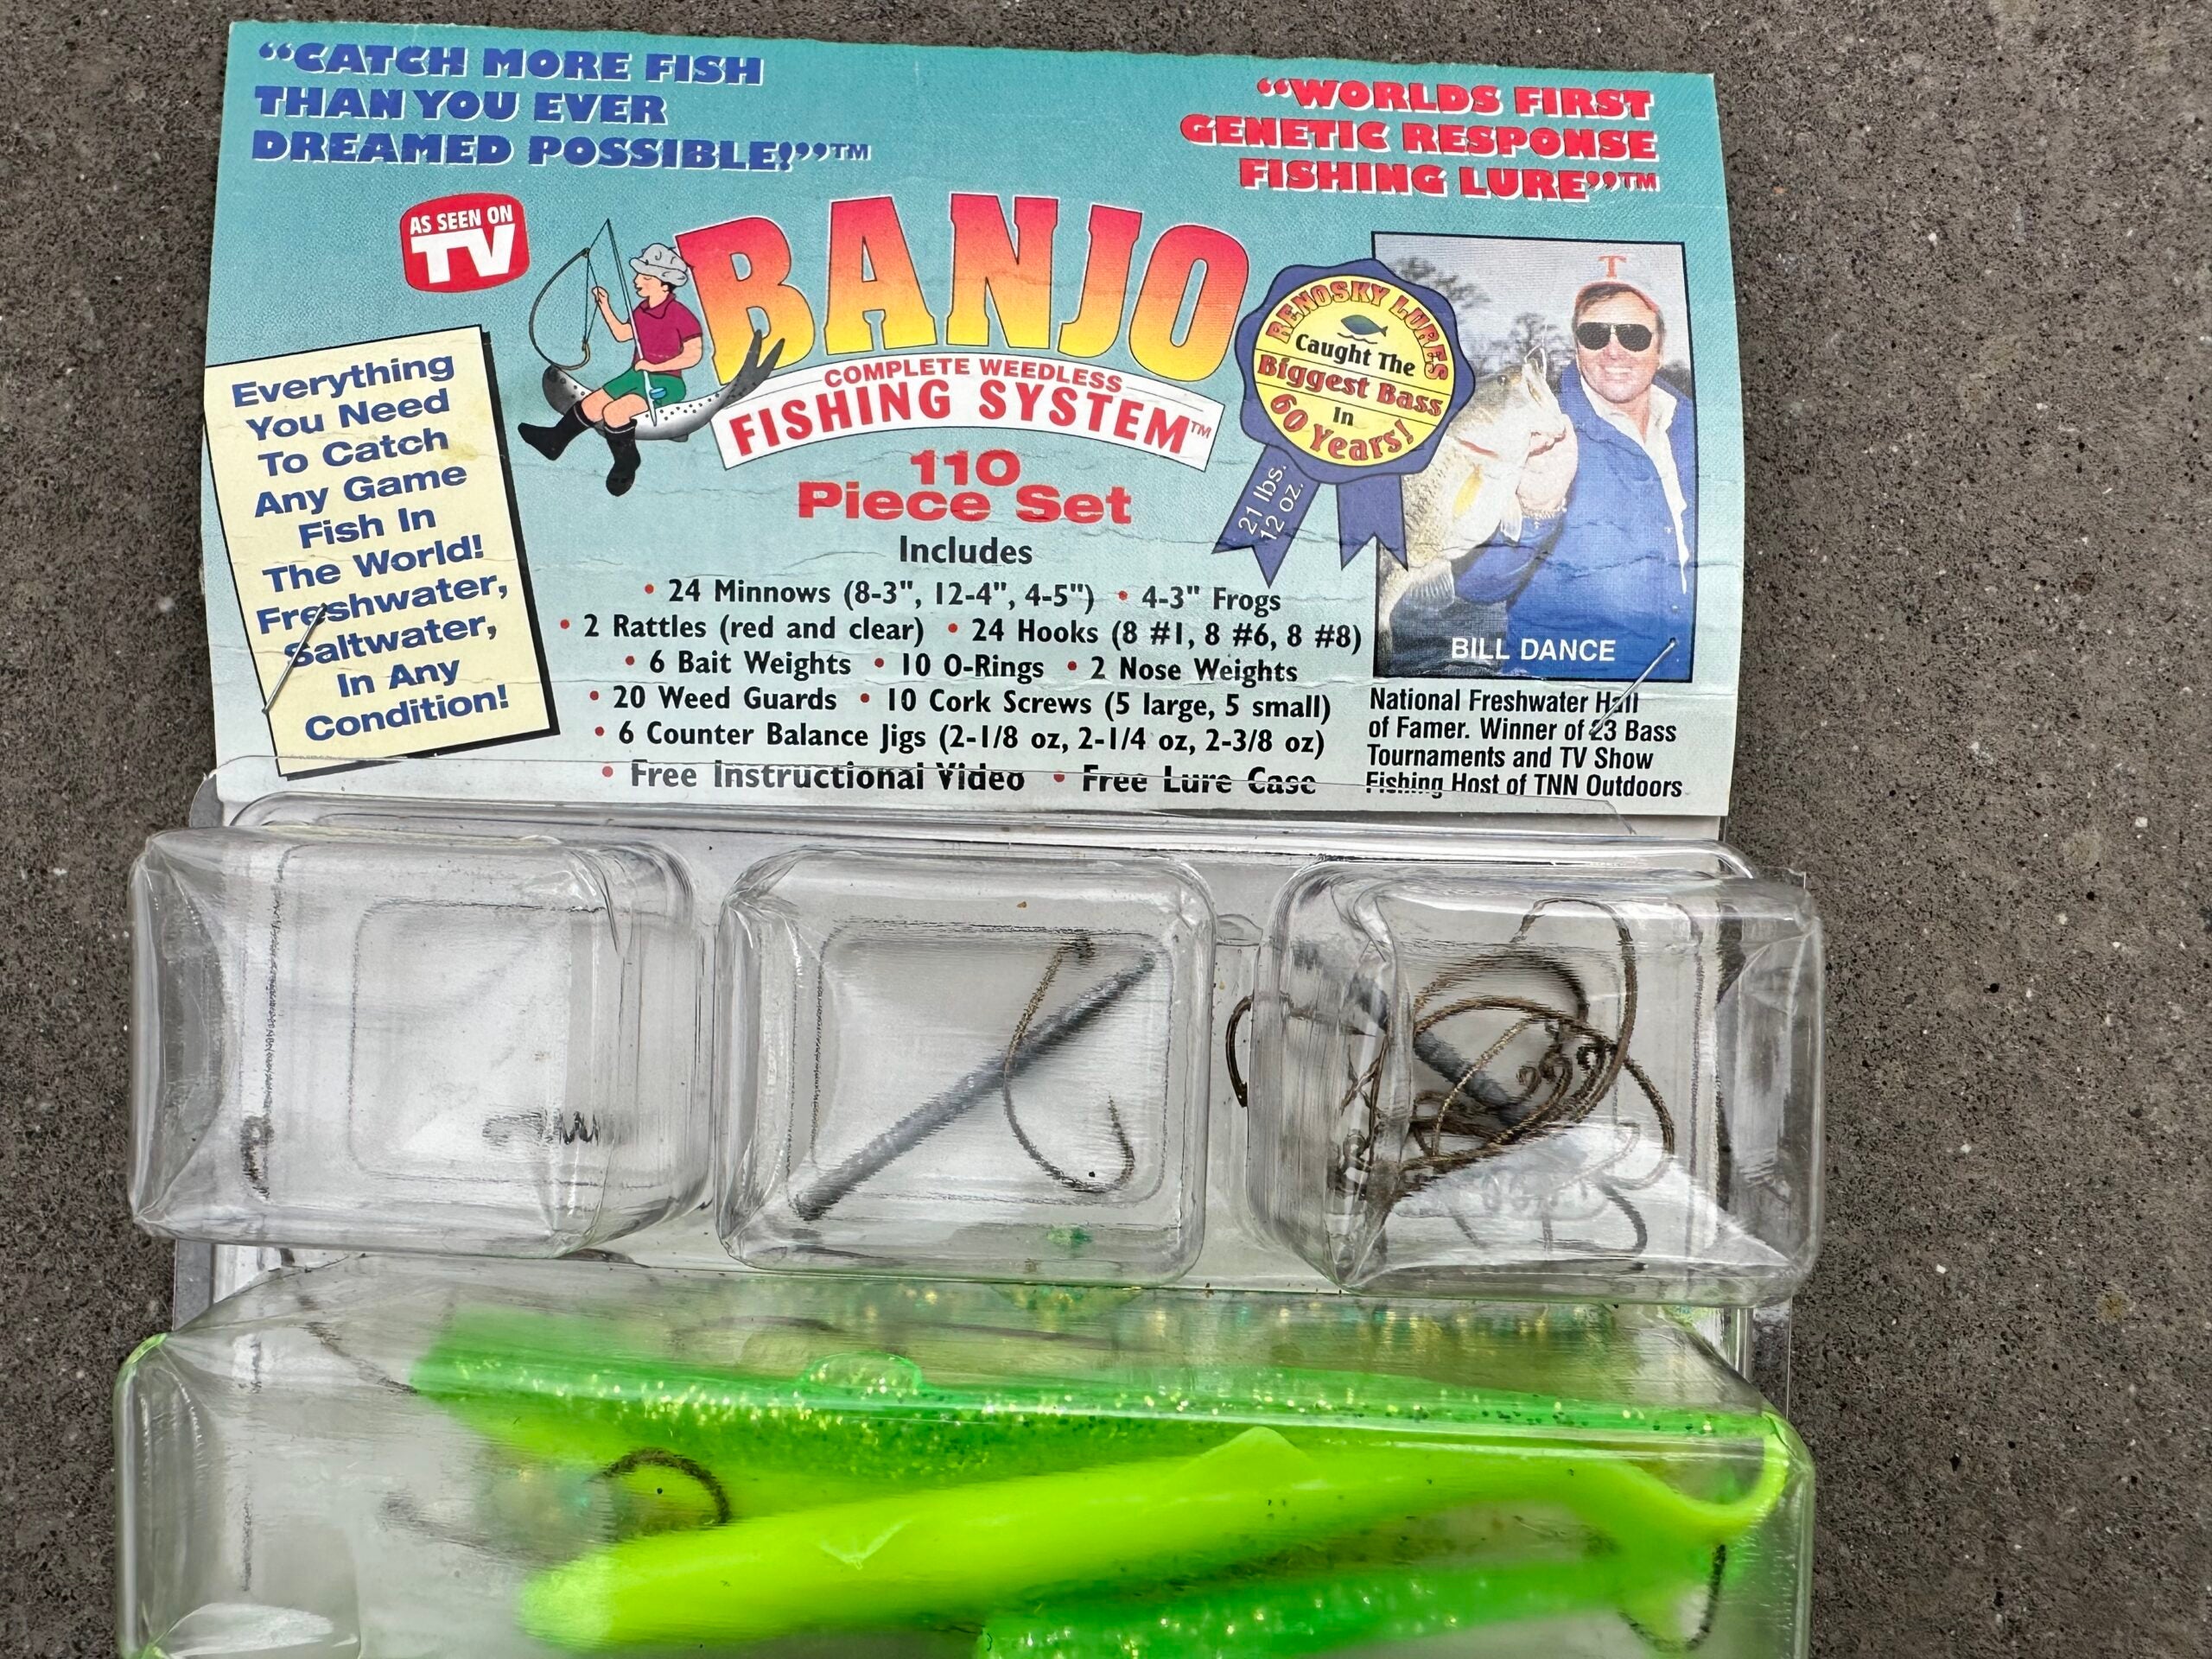 A package for the Banjo Minnow lure kit